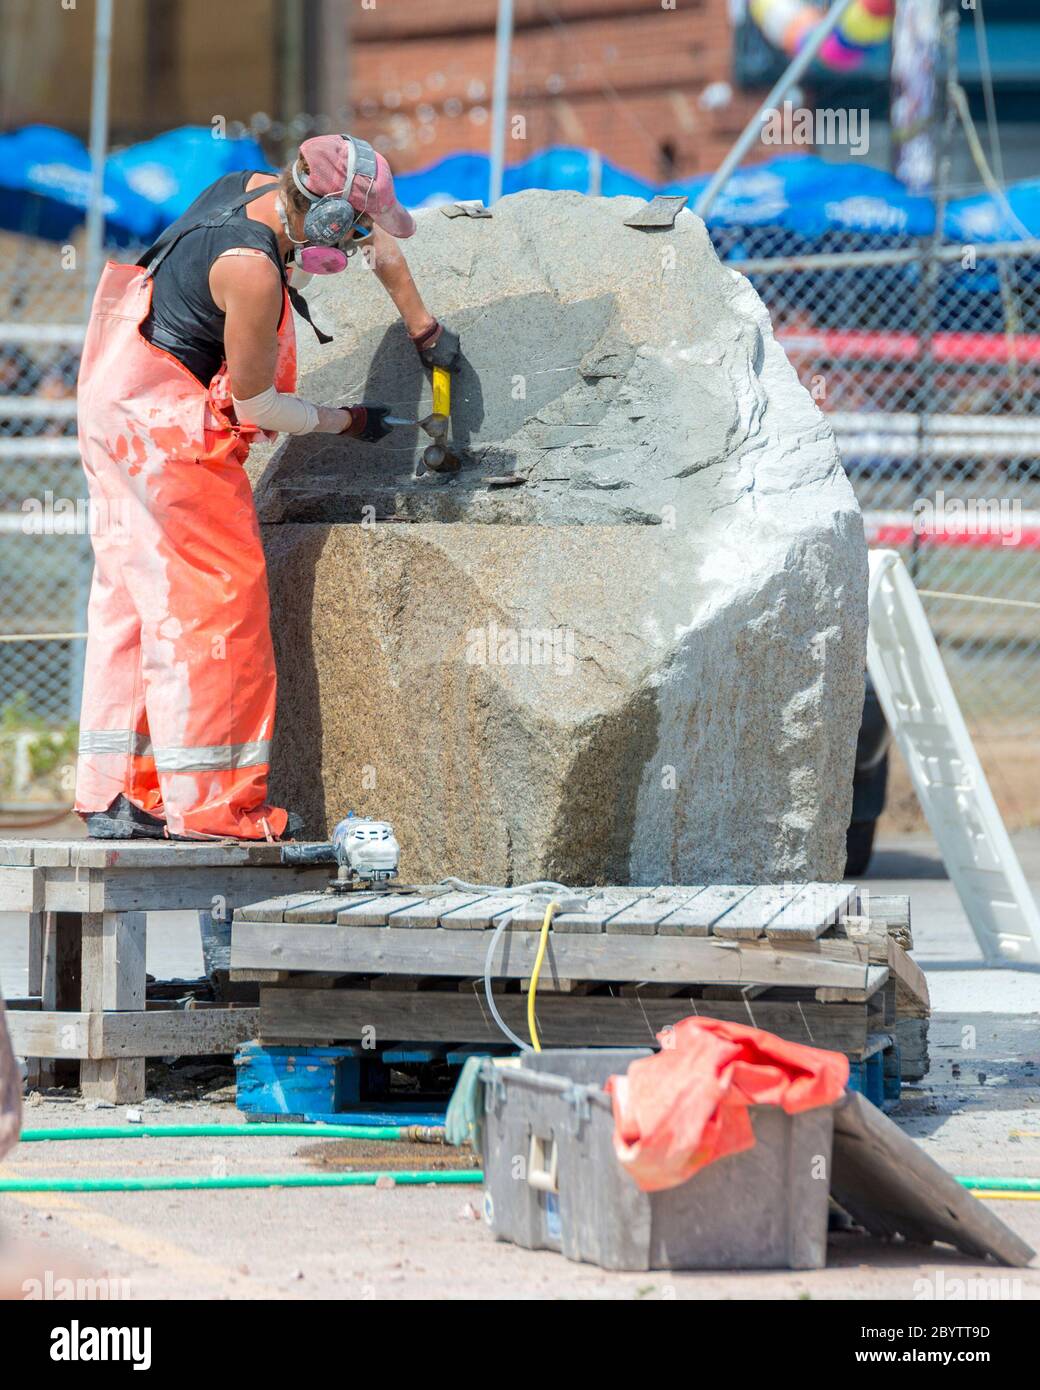 An artist works on a large block of stone at Sculpture Saint John, a sculpture symposium that hosts artists from around the world. Stock Photo